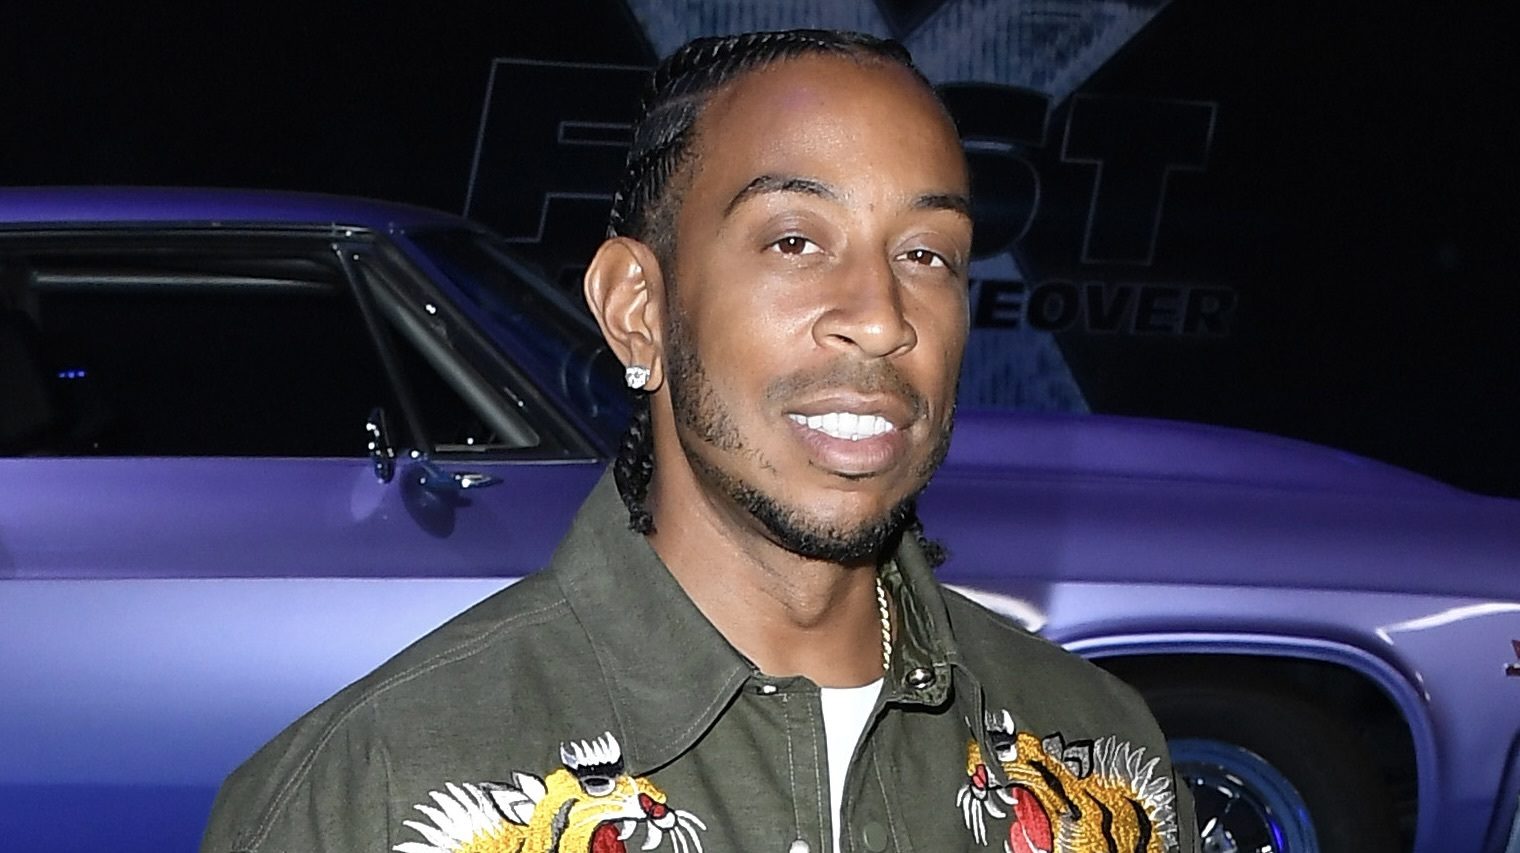 Ludacris opens up about his experiences as a father to girls: 'It's the greatest feeling in the world'

